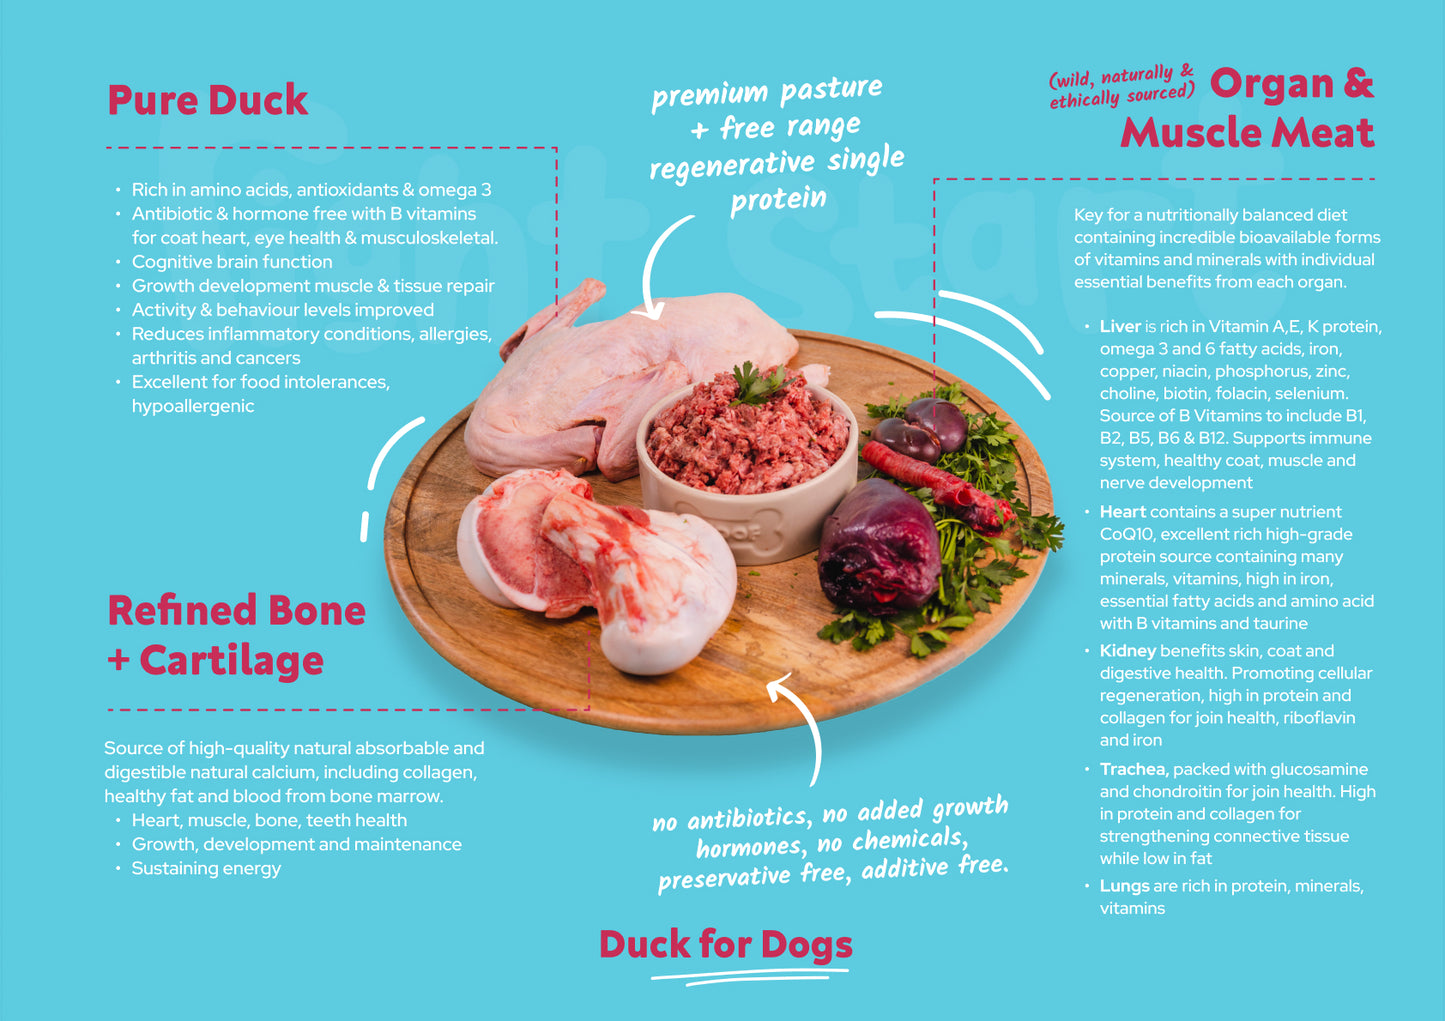 duck for dogs nutrient breakdown right start pet food. organ and muscle meat, refined bone and cartilage nothing added